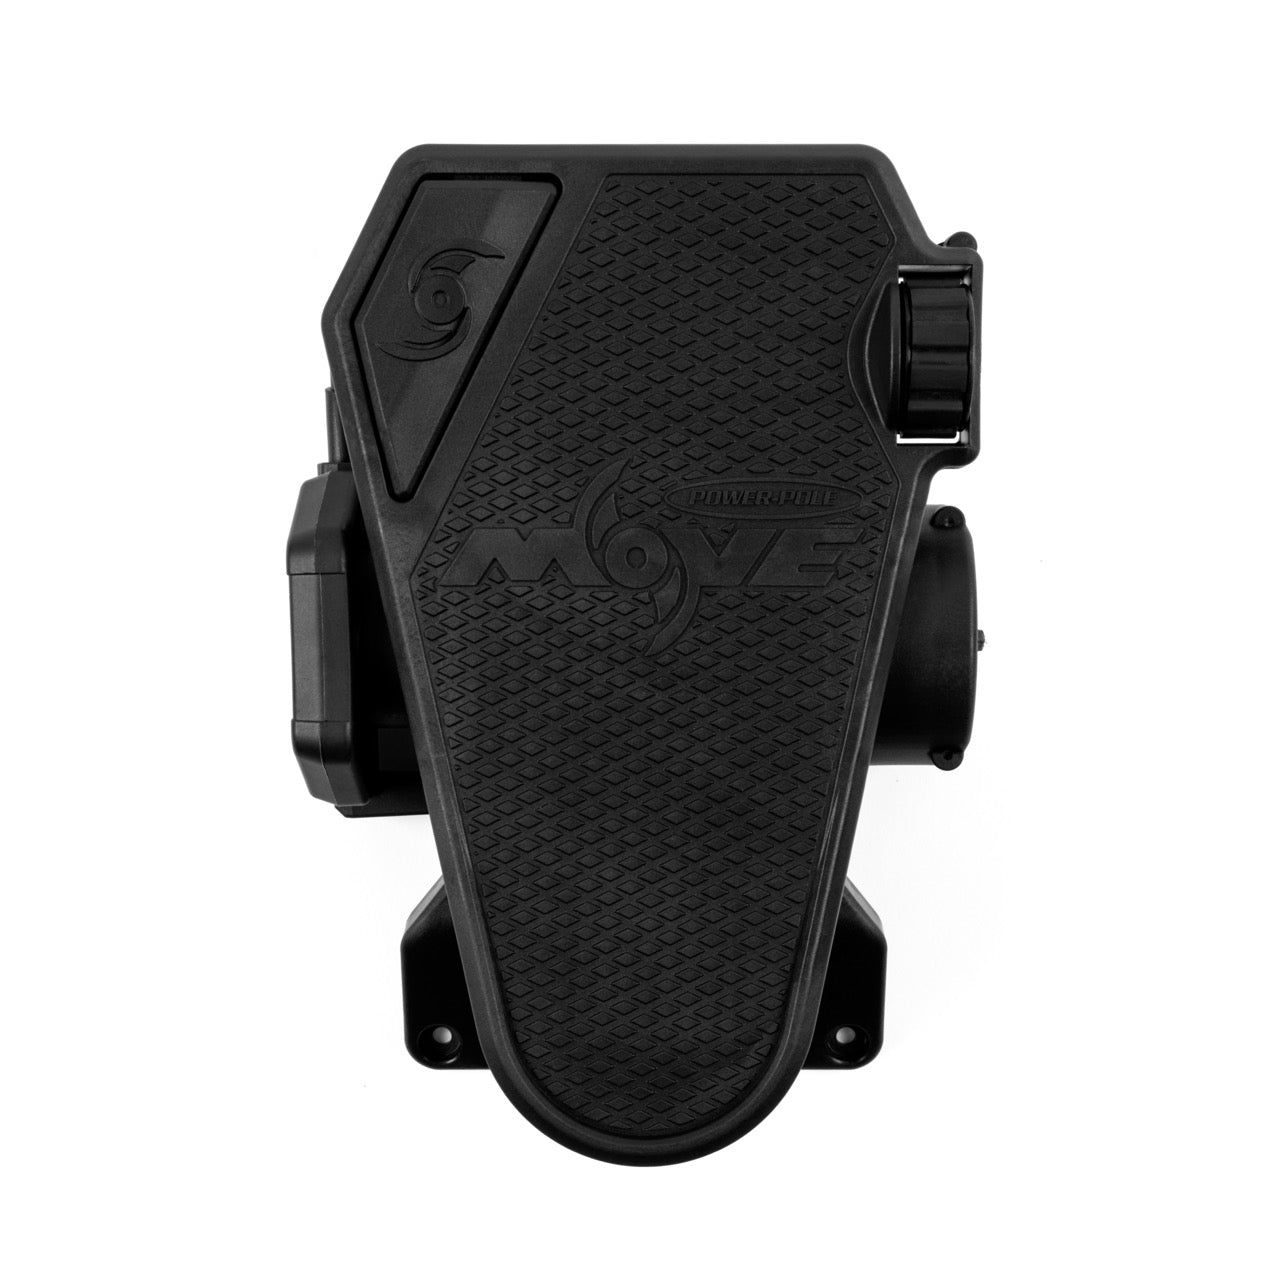 MotorGuide - 8m0092069 Wireless Foot Pedal